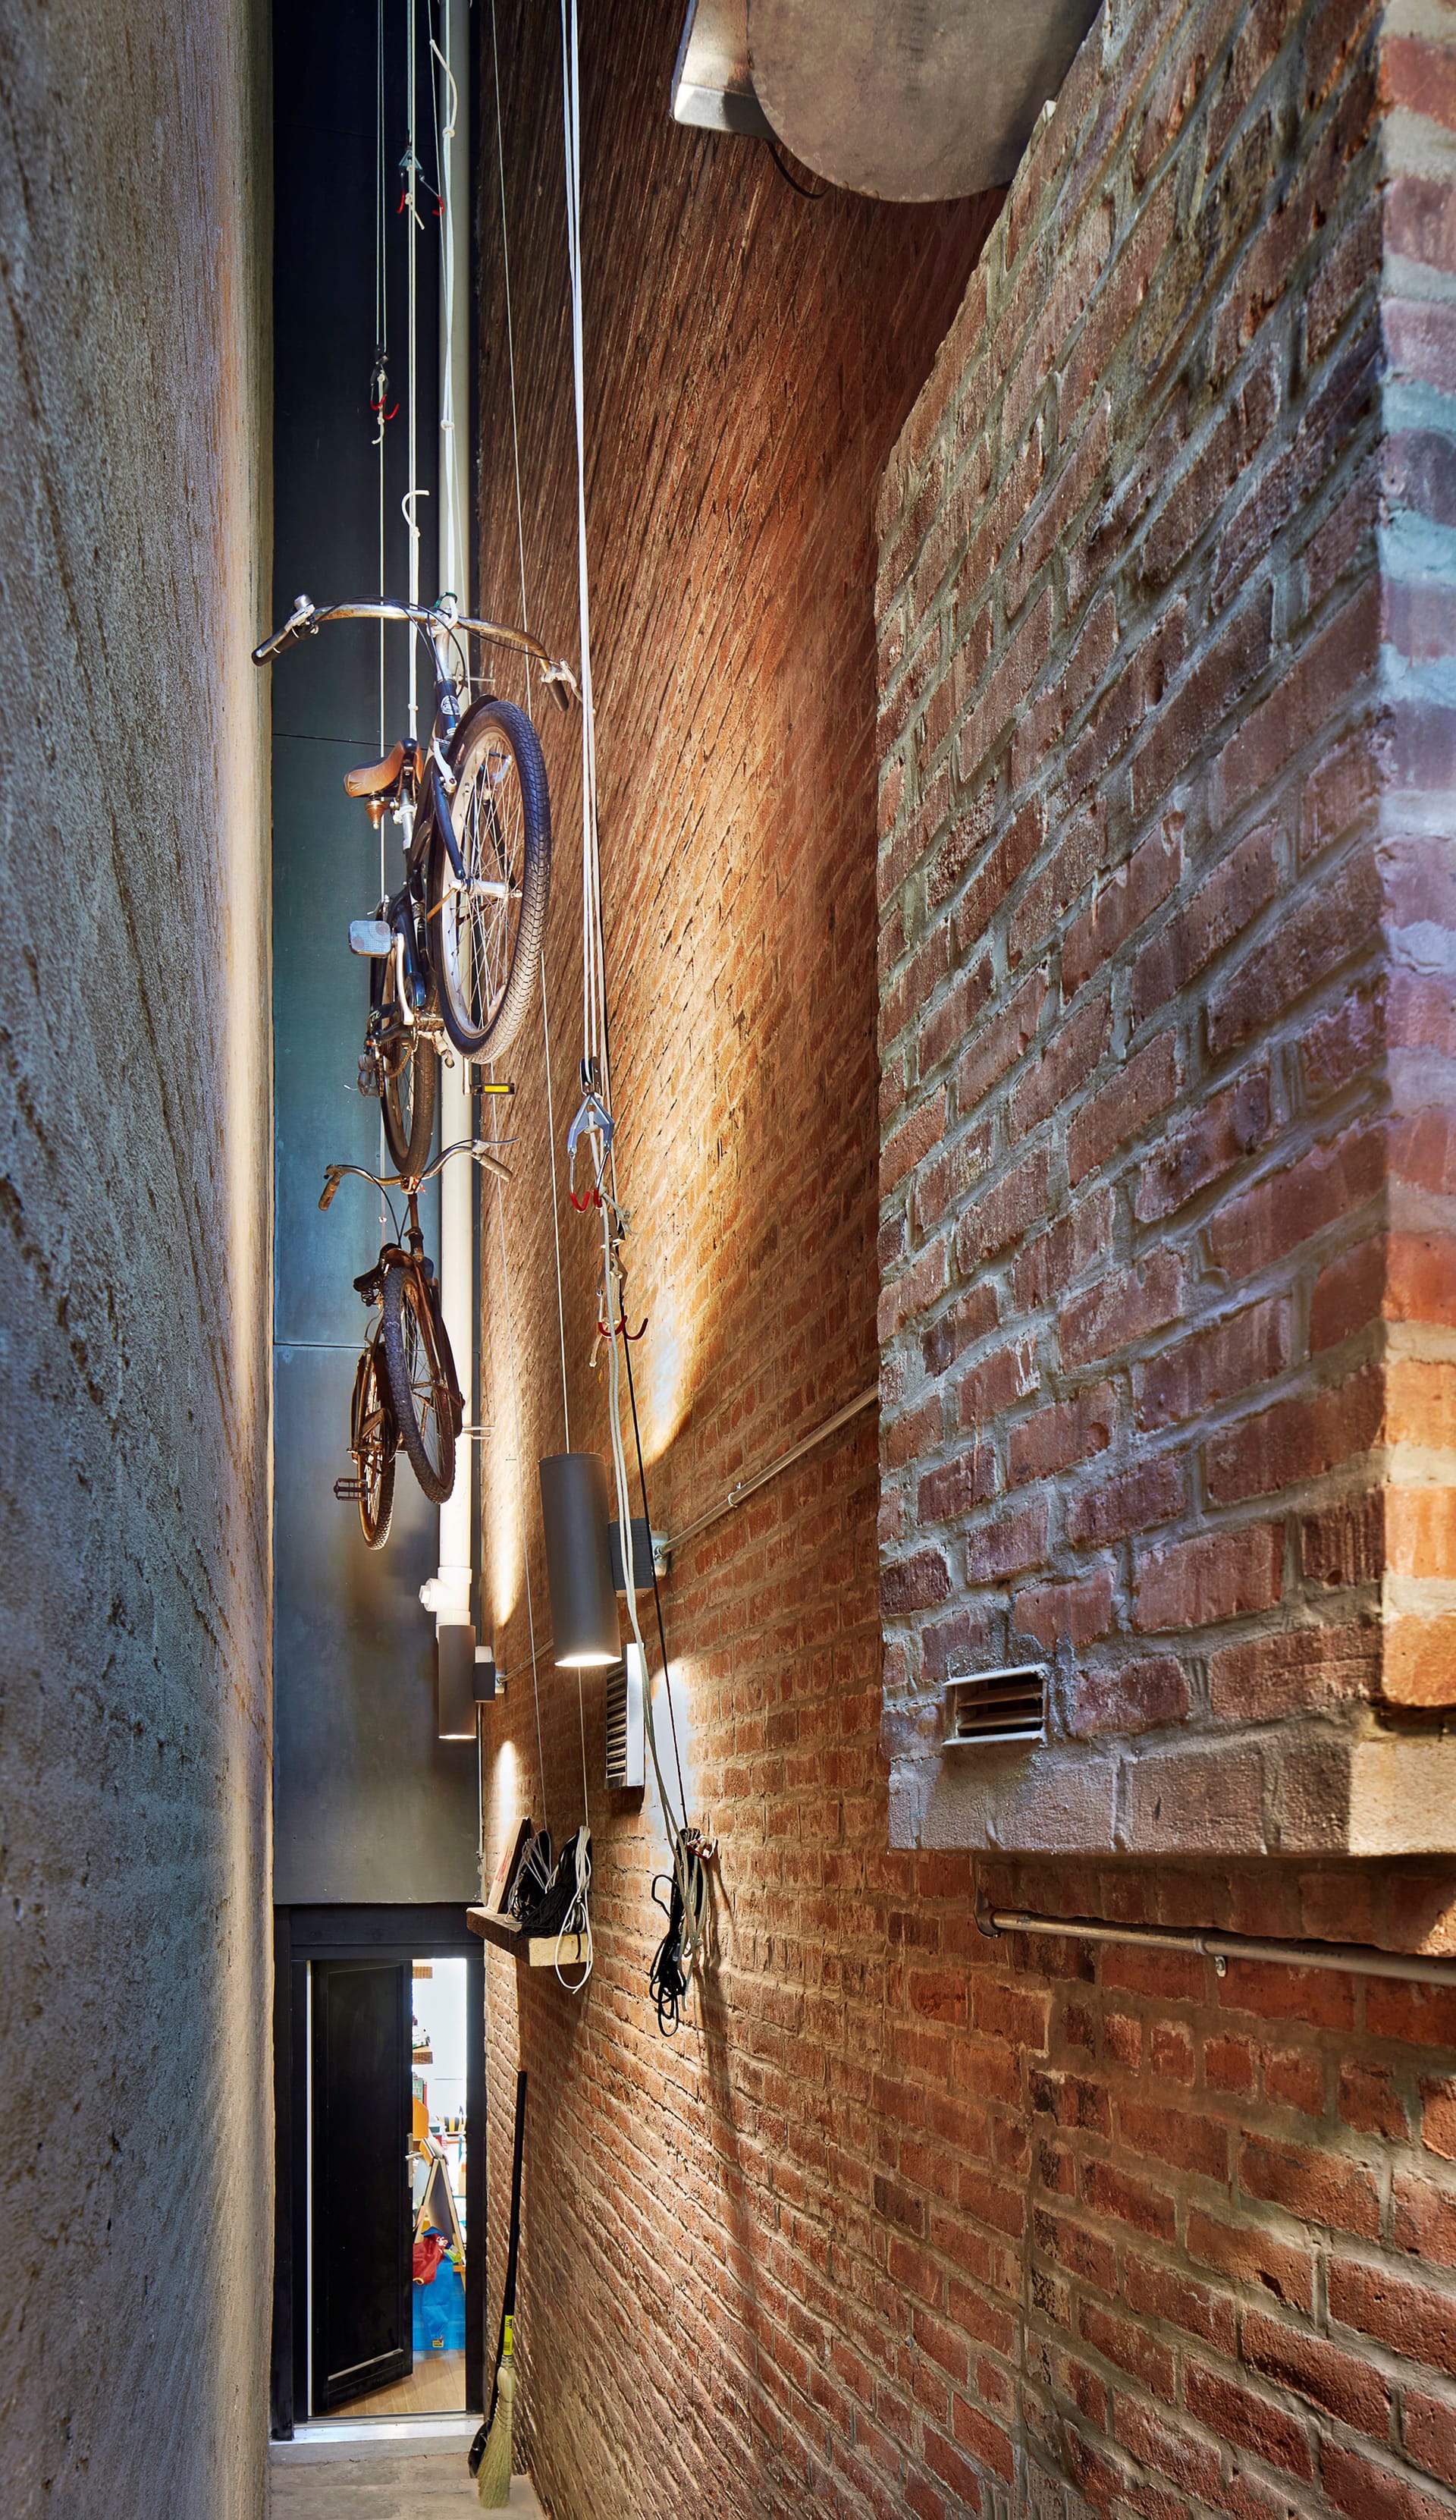 Brick alley with two bikes suspended in the air.